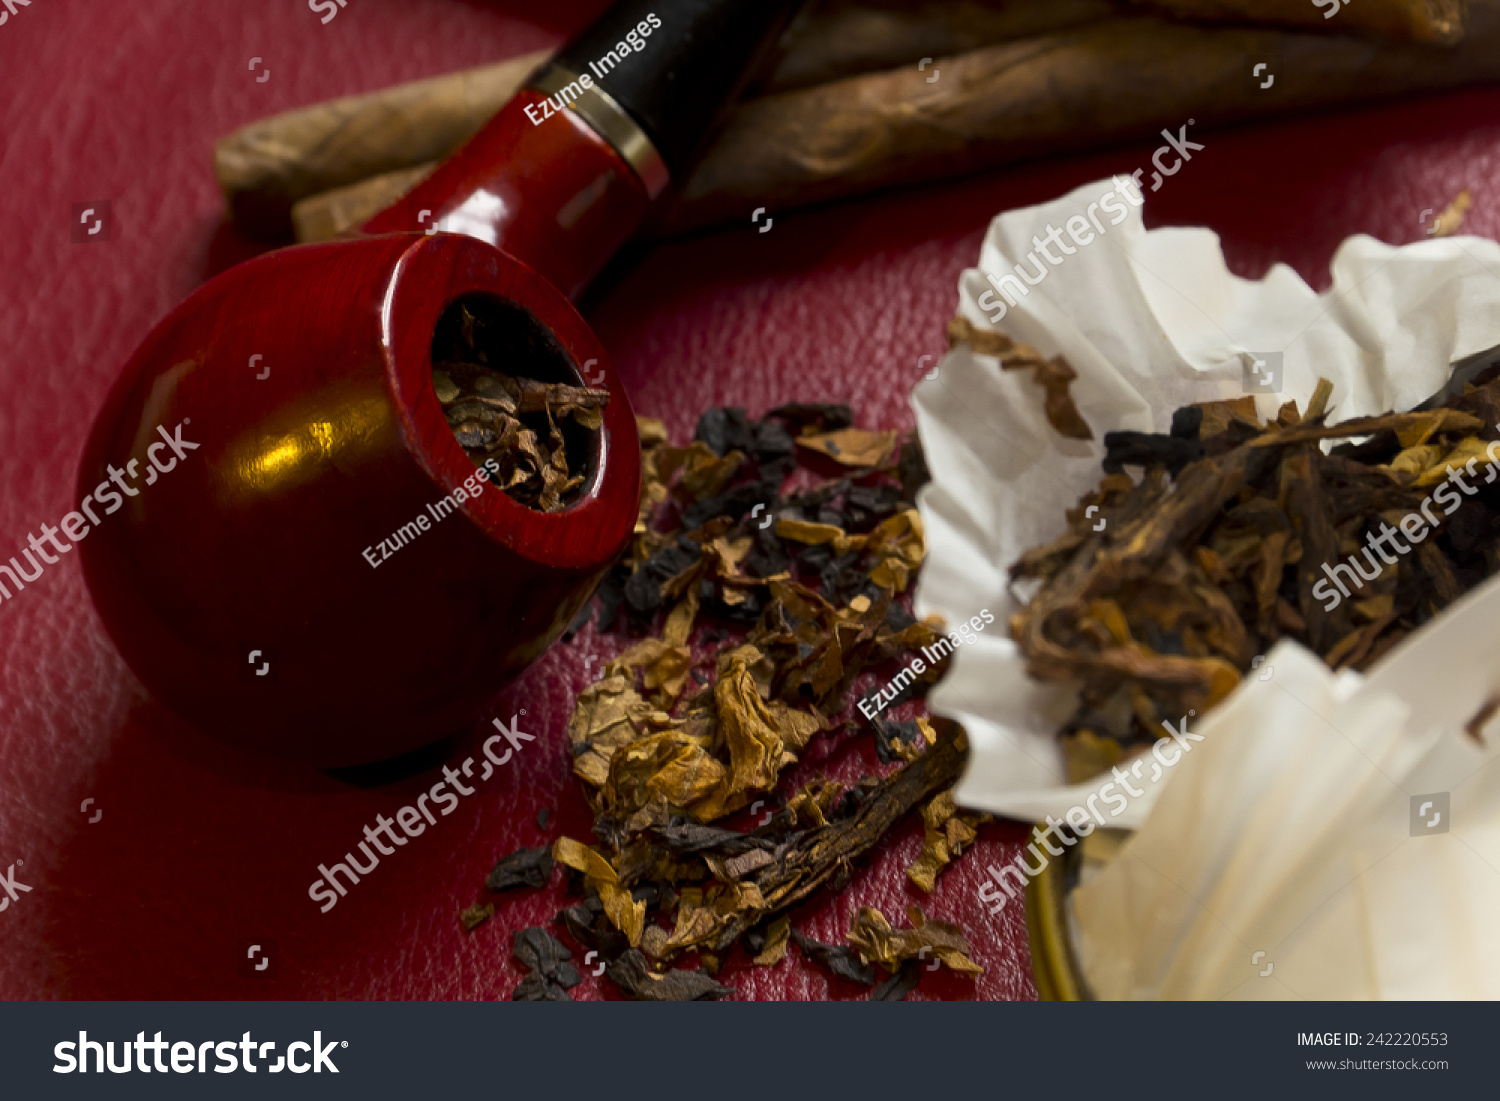 Pipe, tobacco, cigarettes, cigars, smoking, etc. on red leather background  #242220553